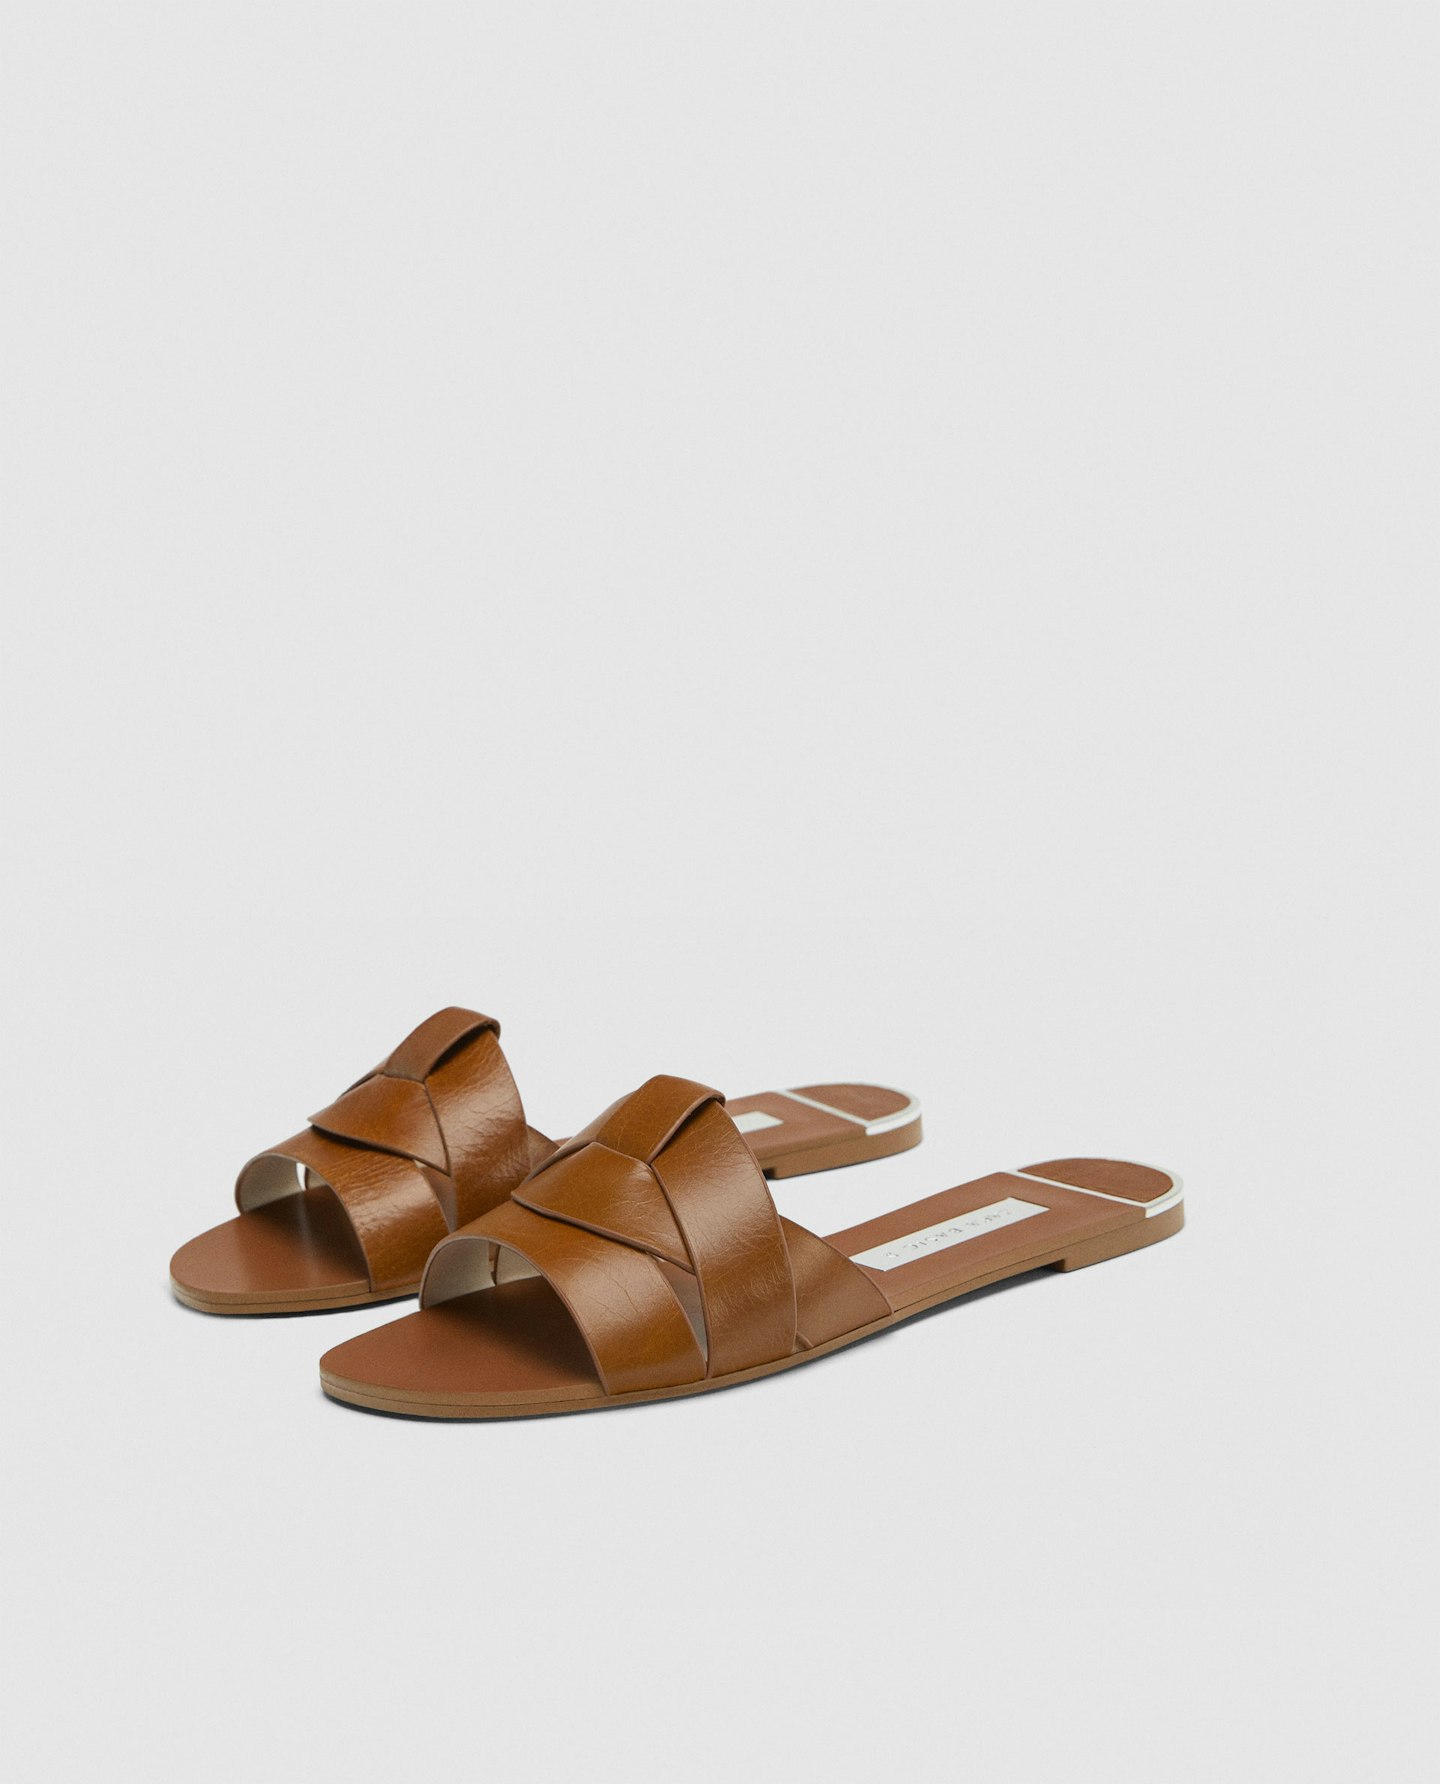 leather sandals workwear